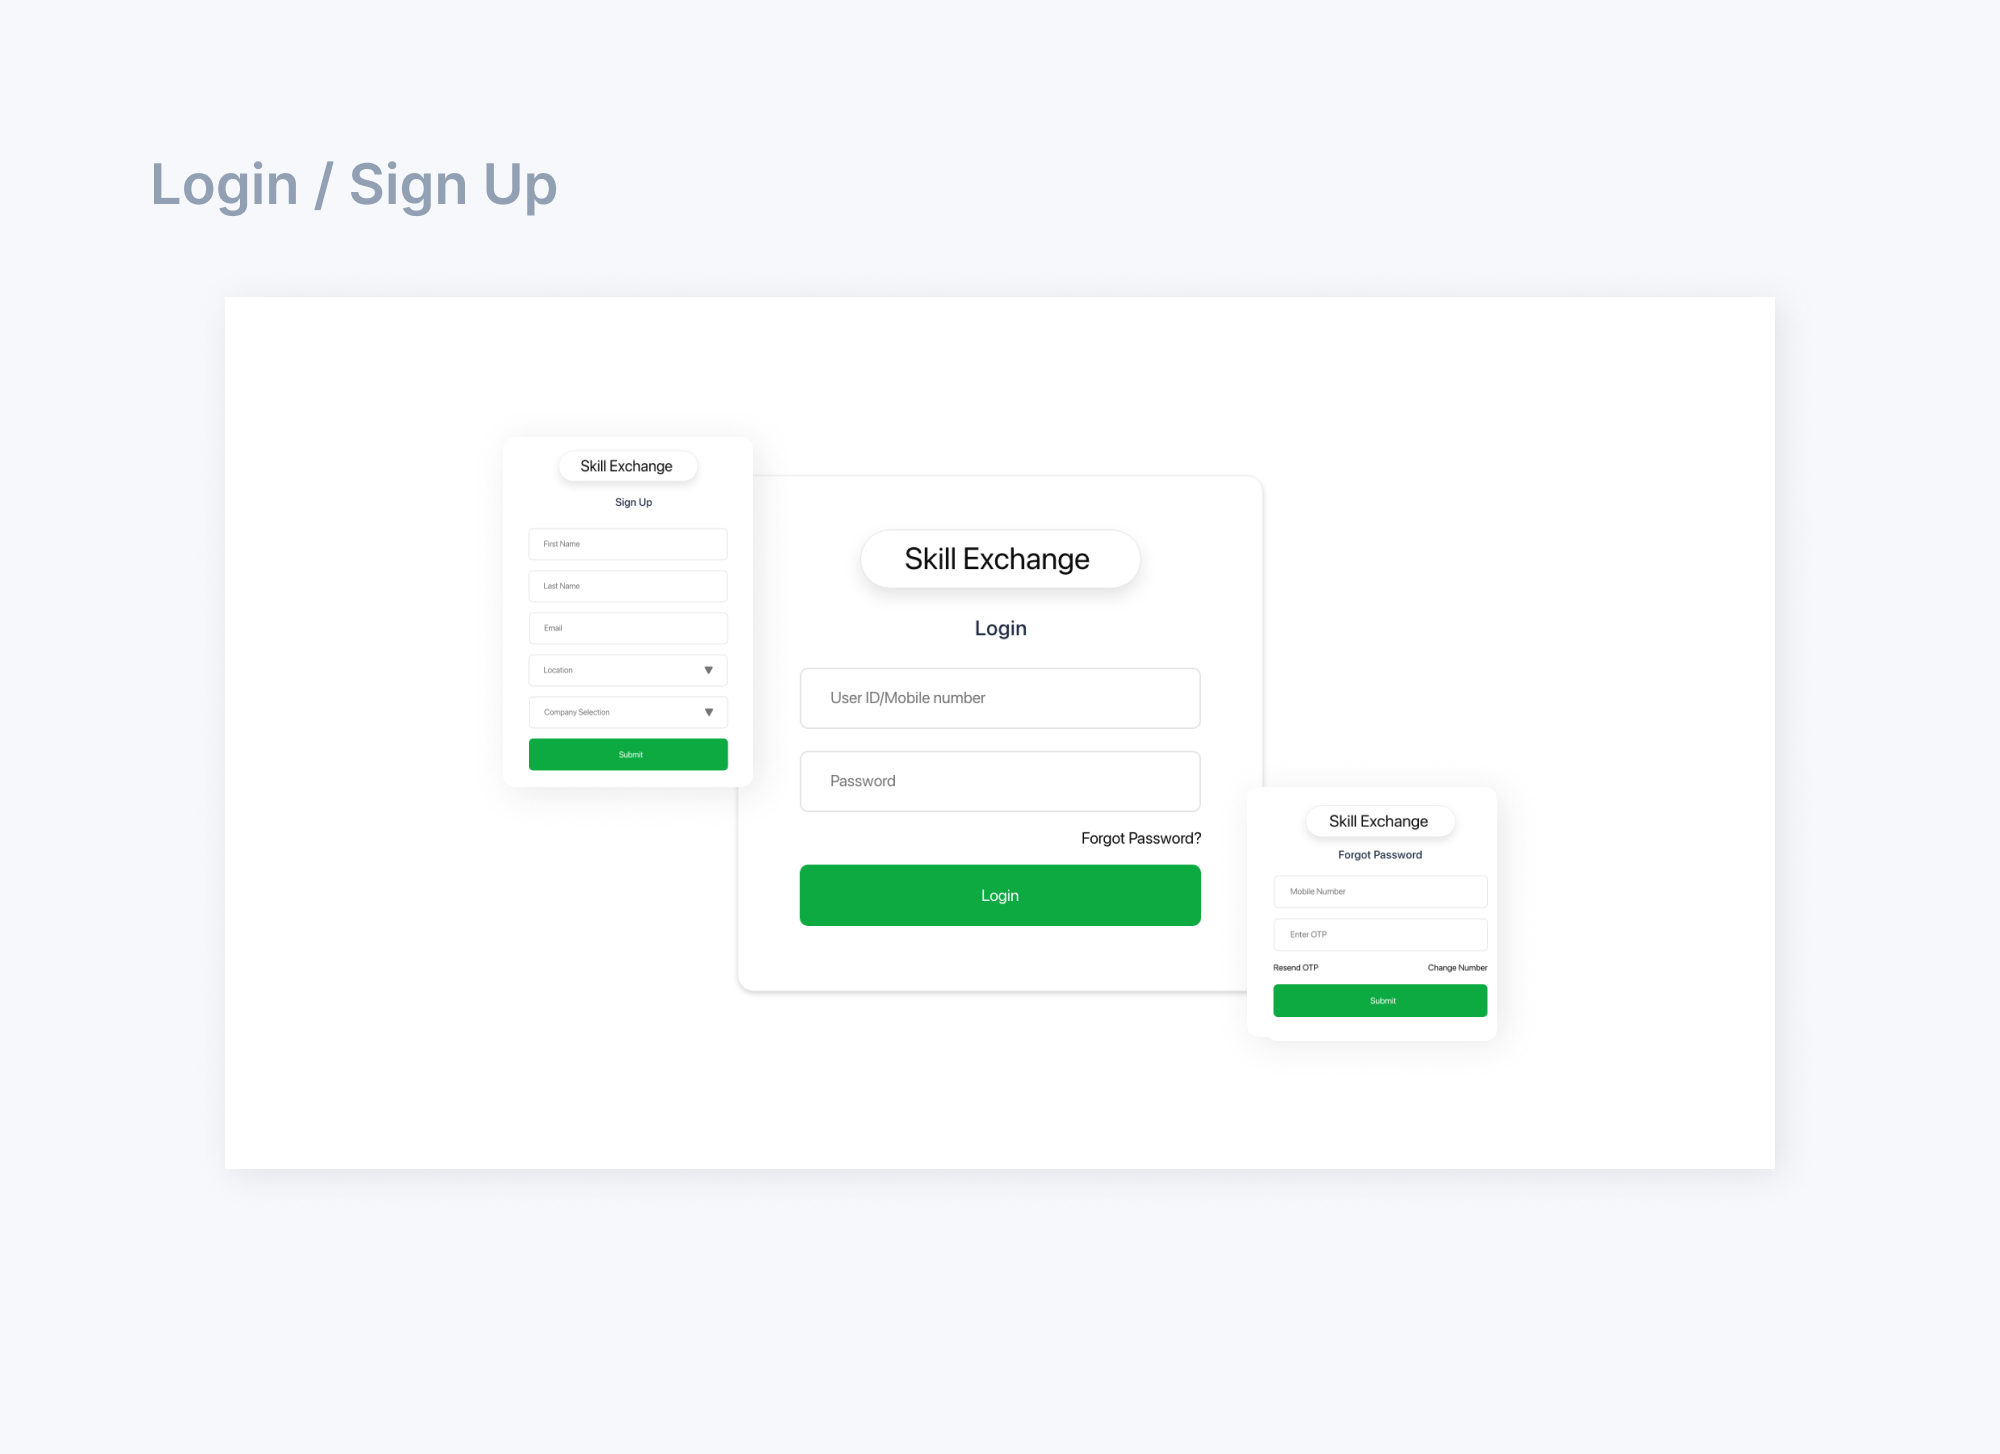 1.Sign-up